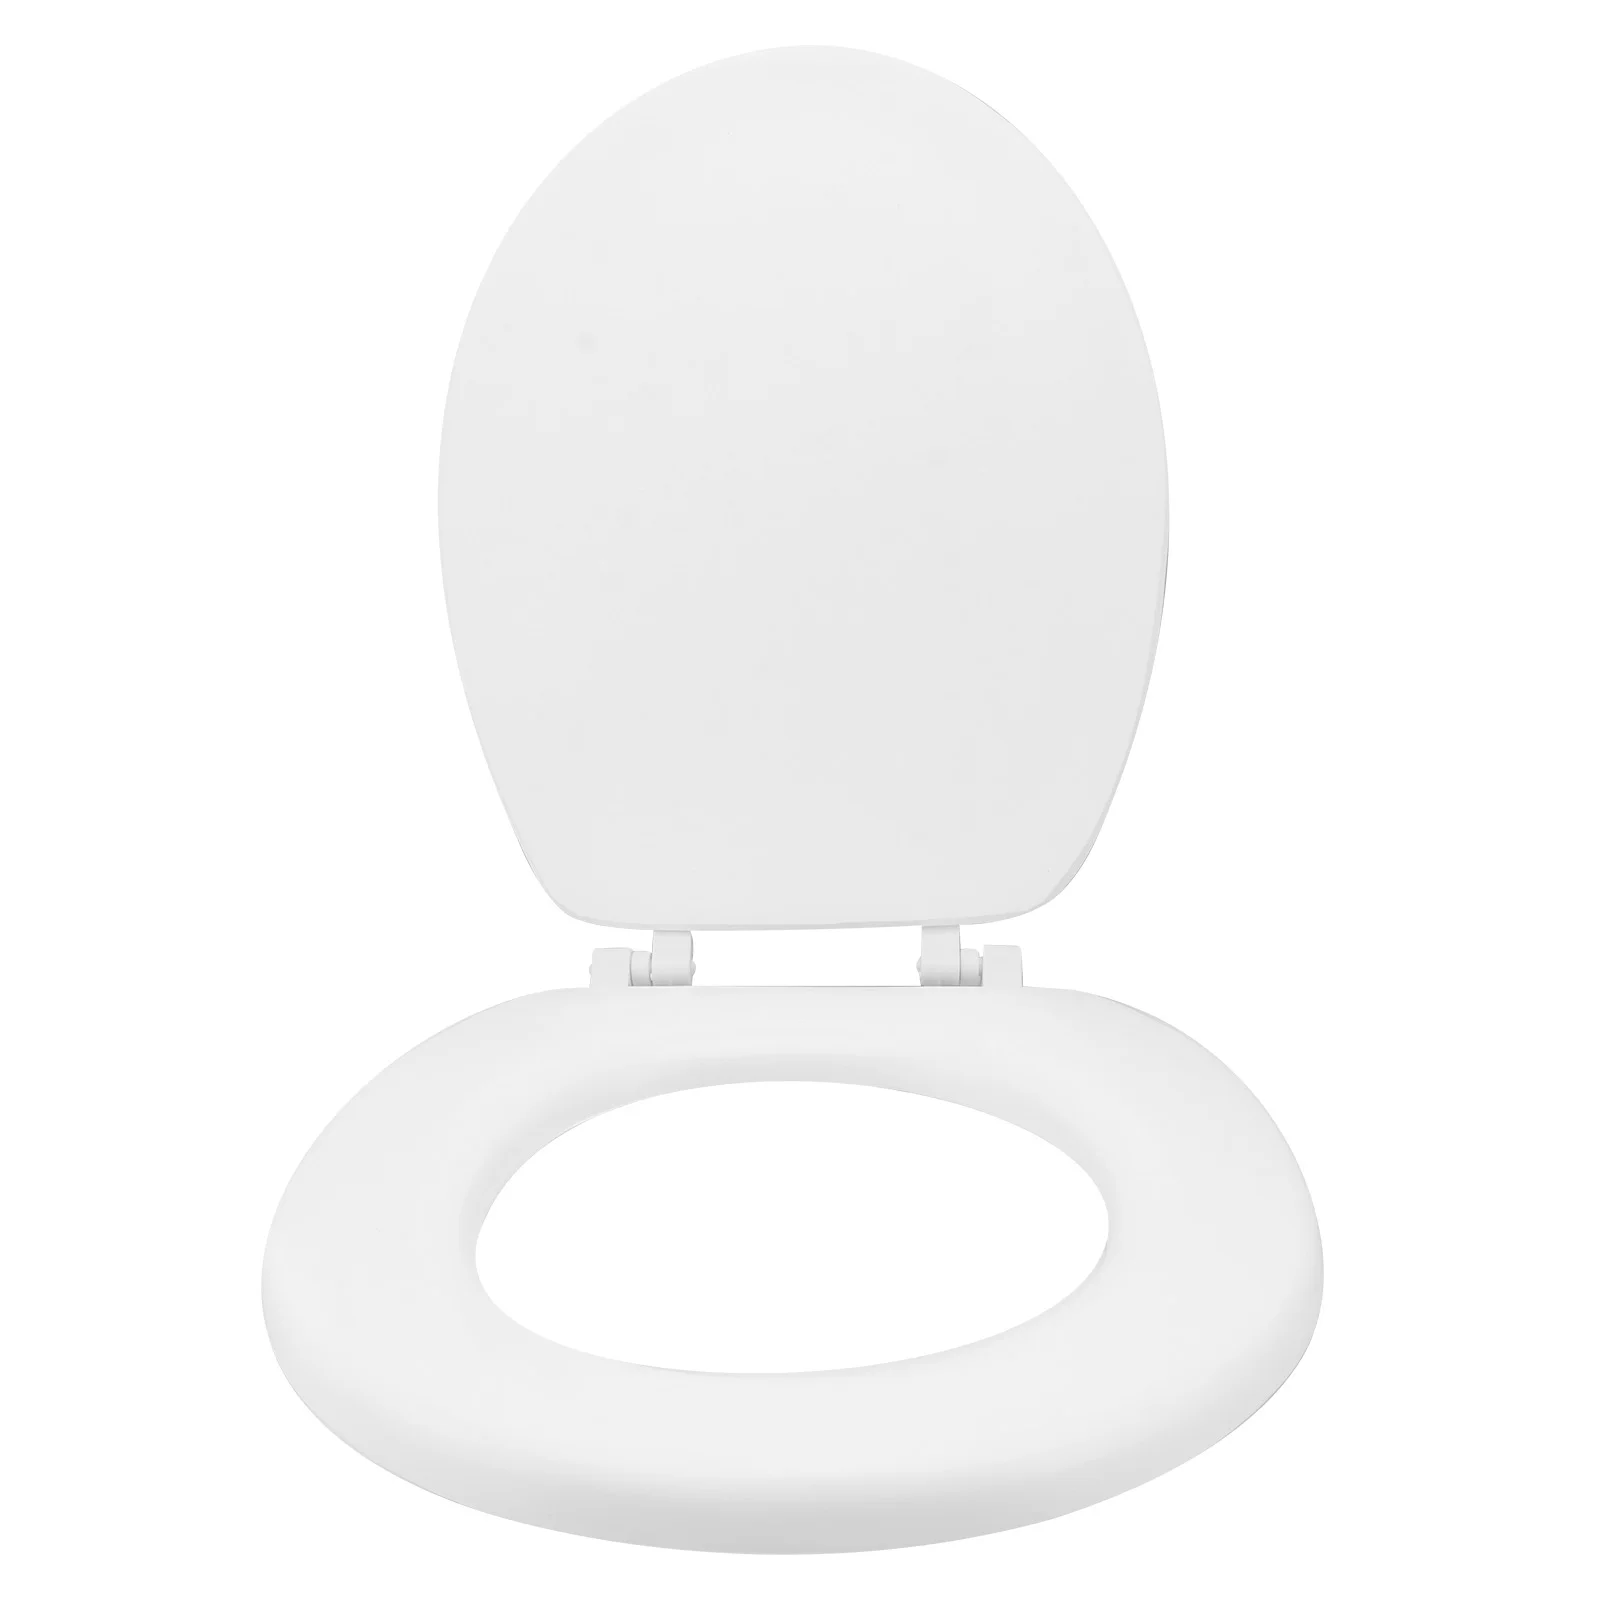 Cover Seats Lid Toilets Elongated Close Slow Standard Oval T